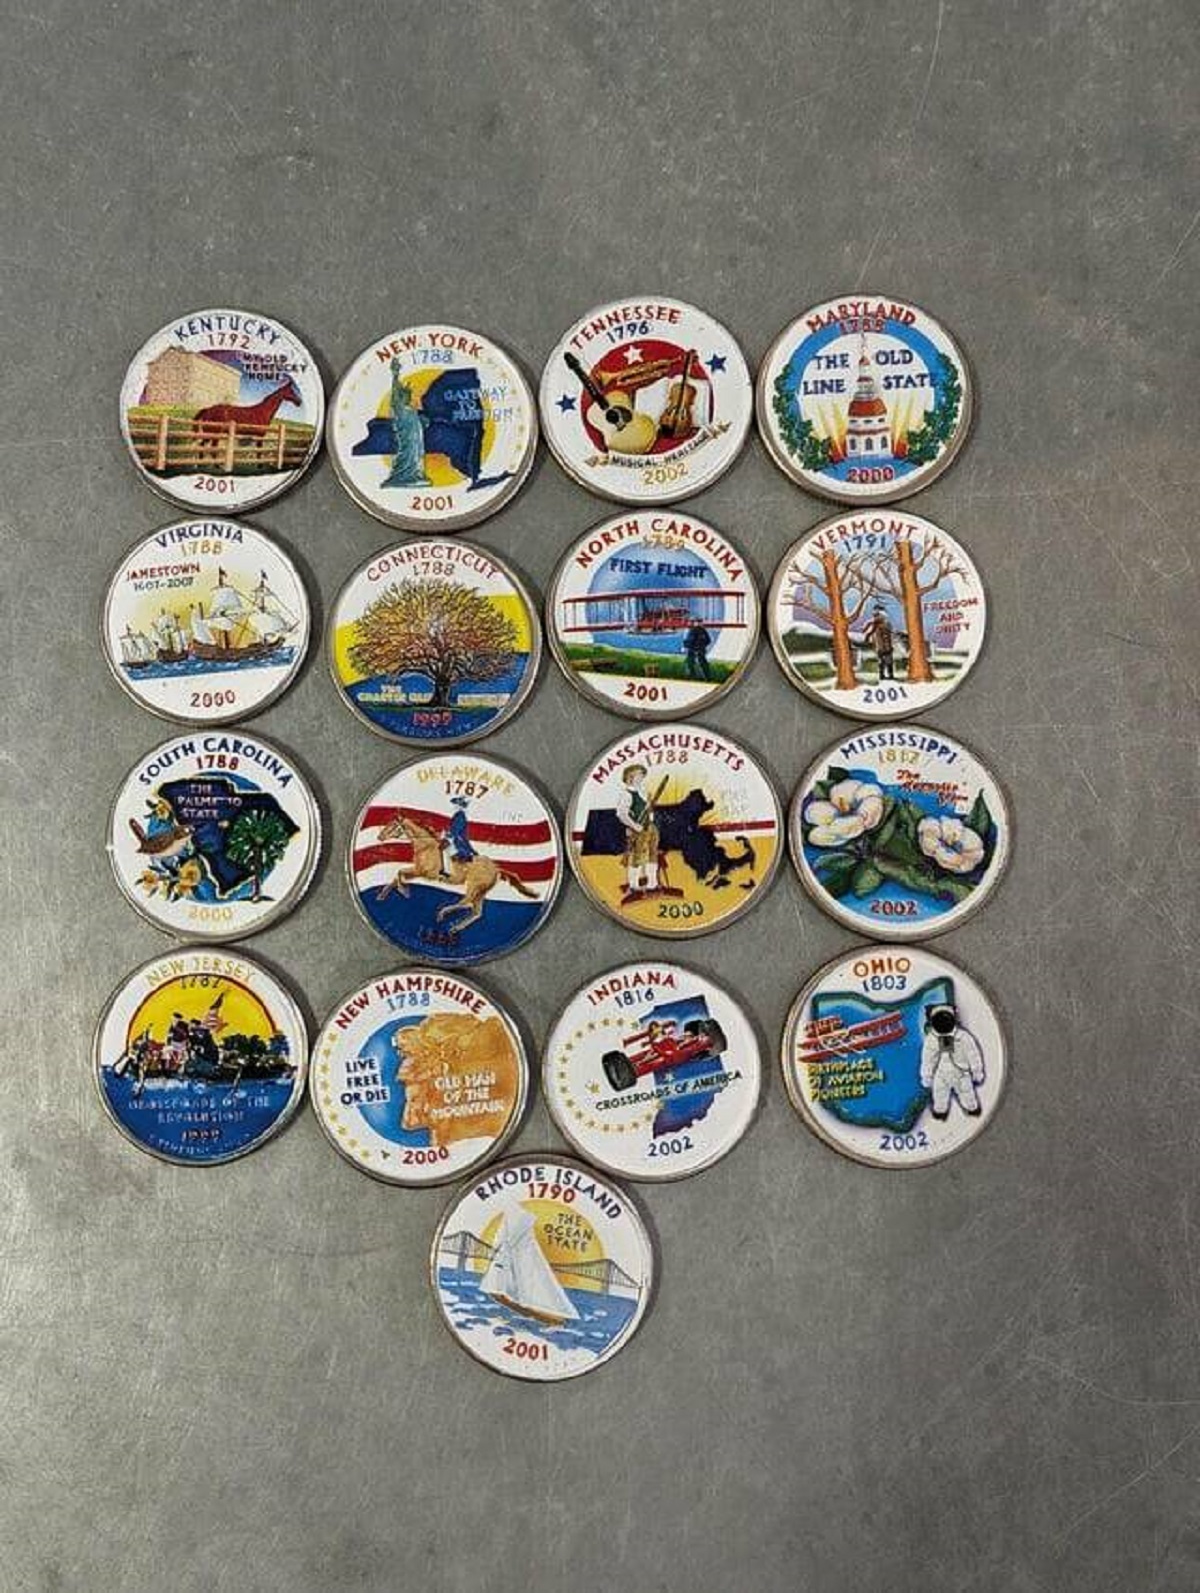 "Someone paid with these colorized state quarters at the store"